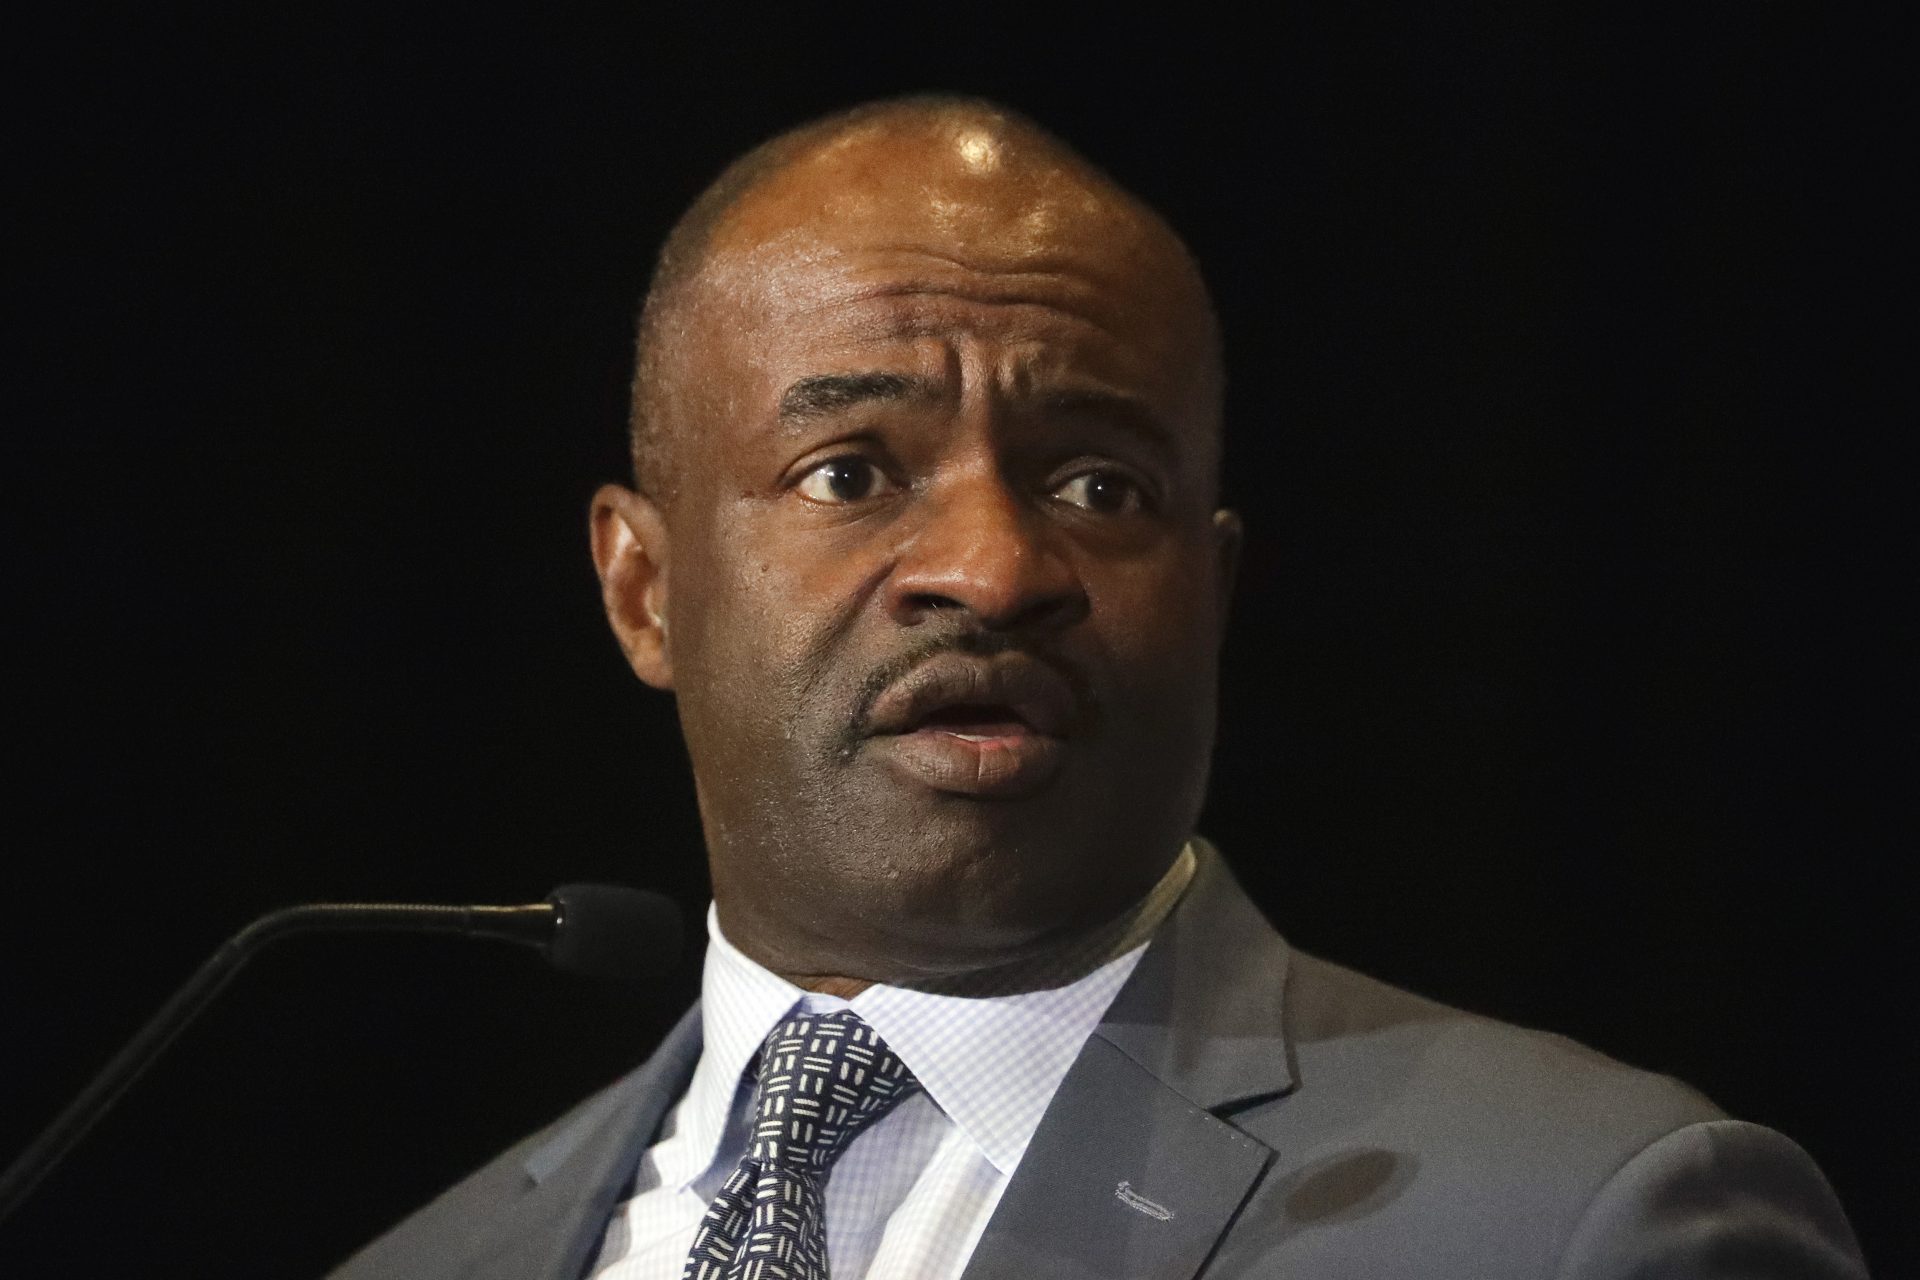 DeMaurice Smith Elected to Back Original Term as NFLPA Govt Director